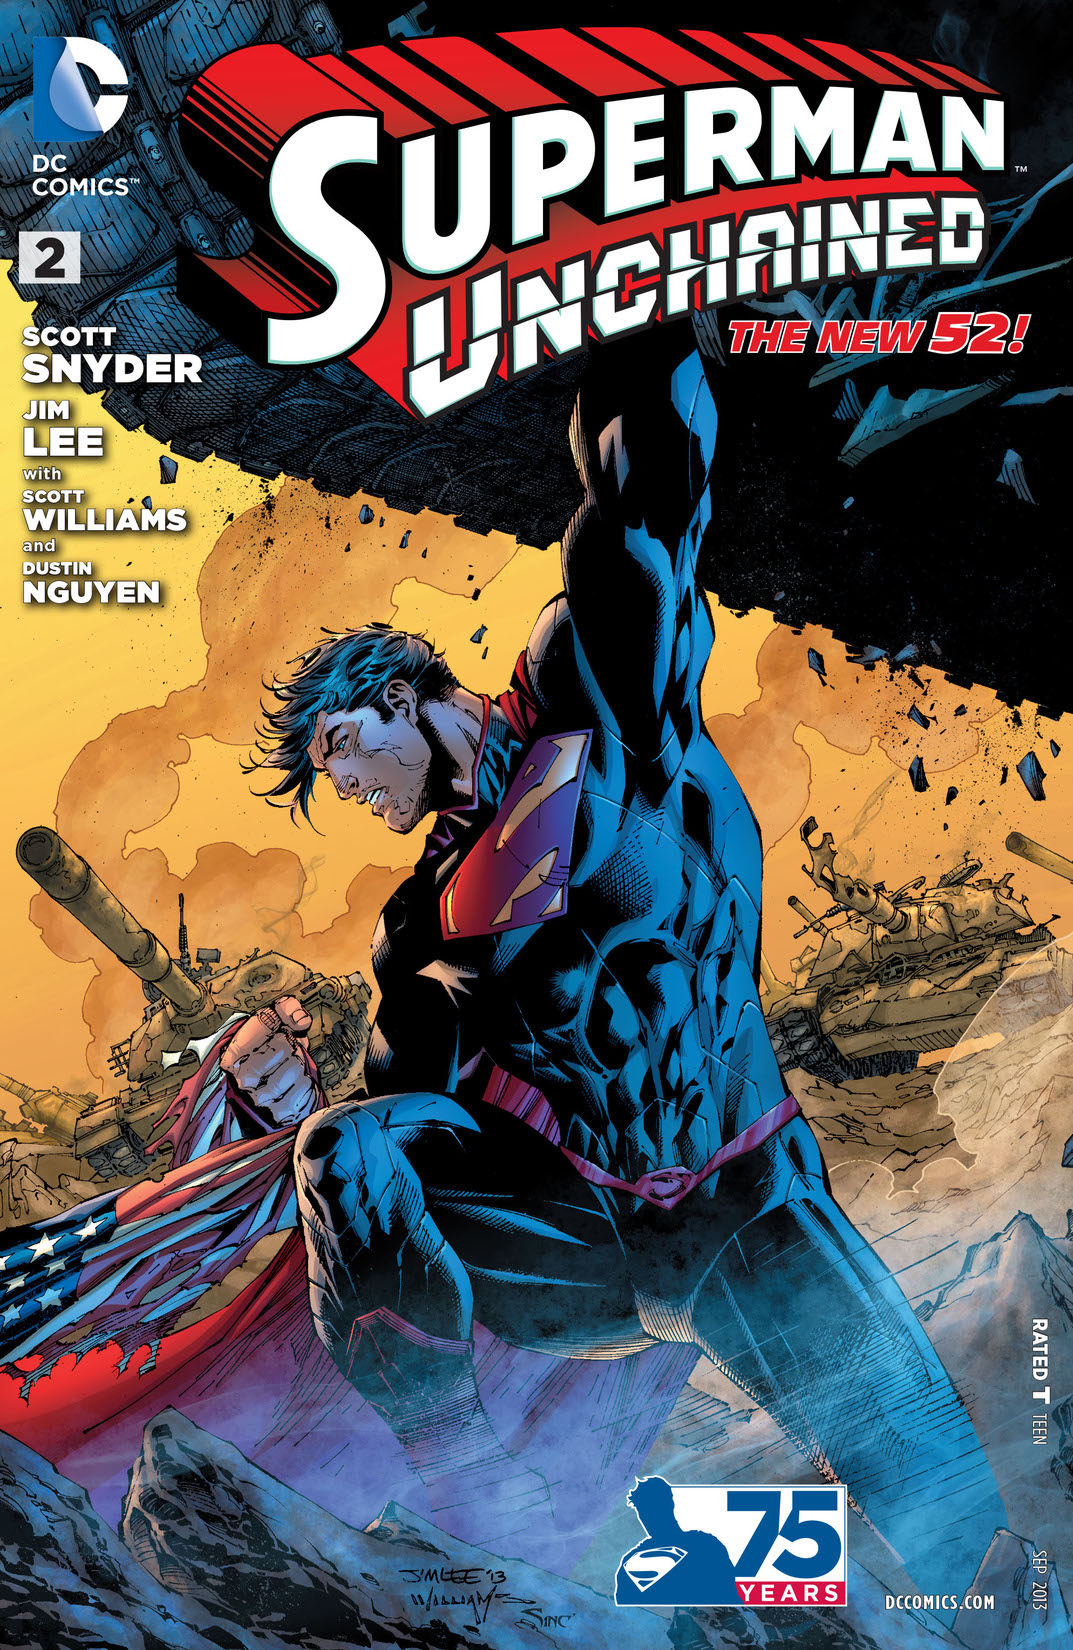 Superman Unchained #2 preview images